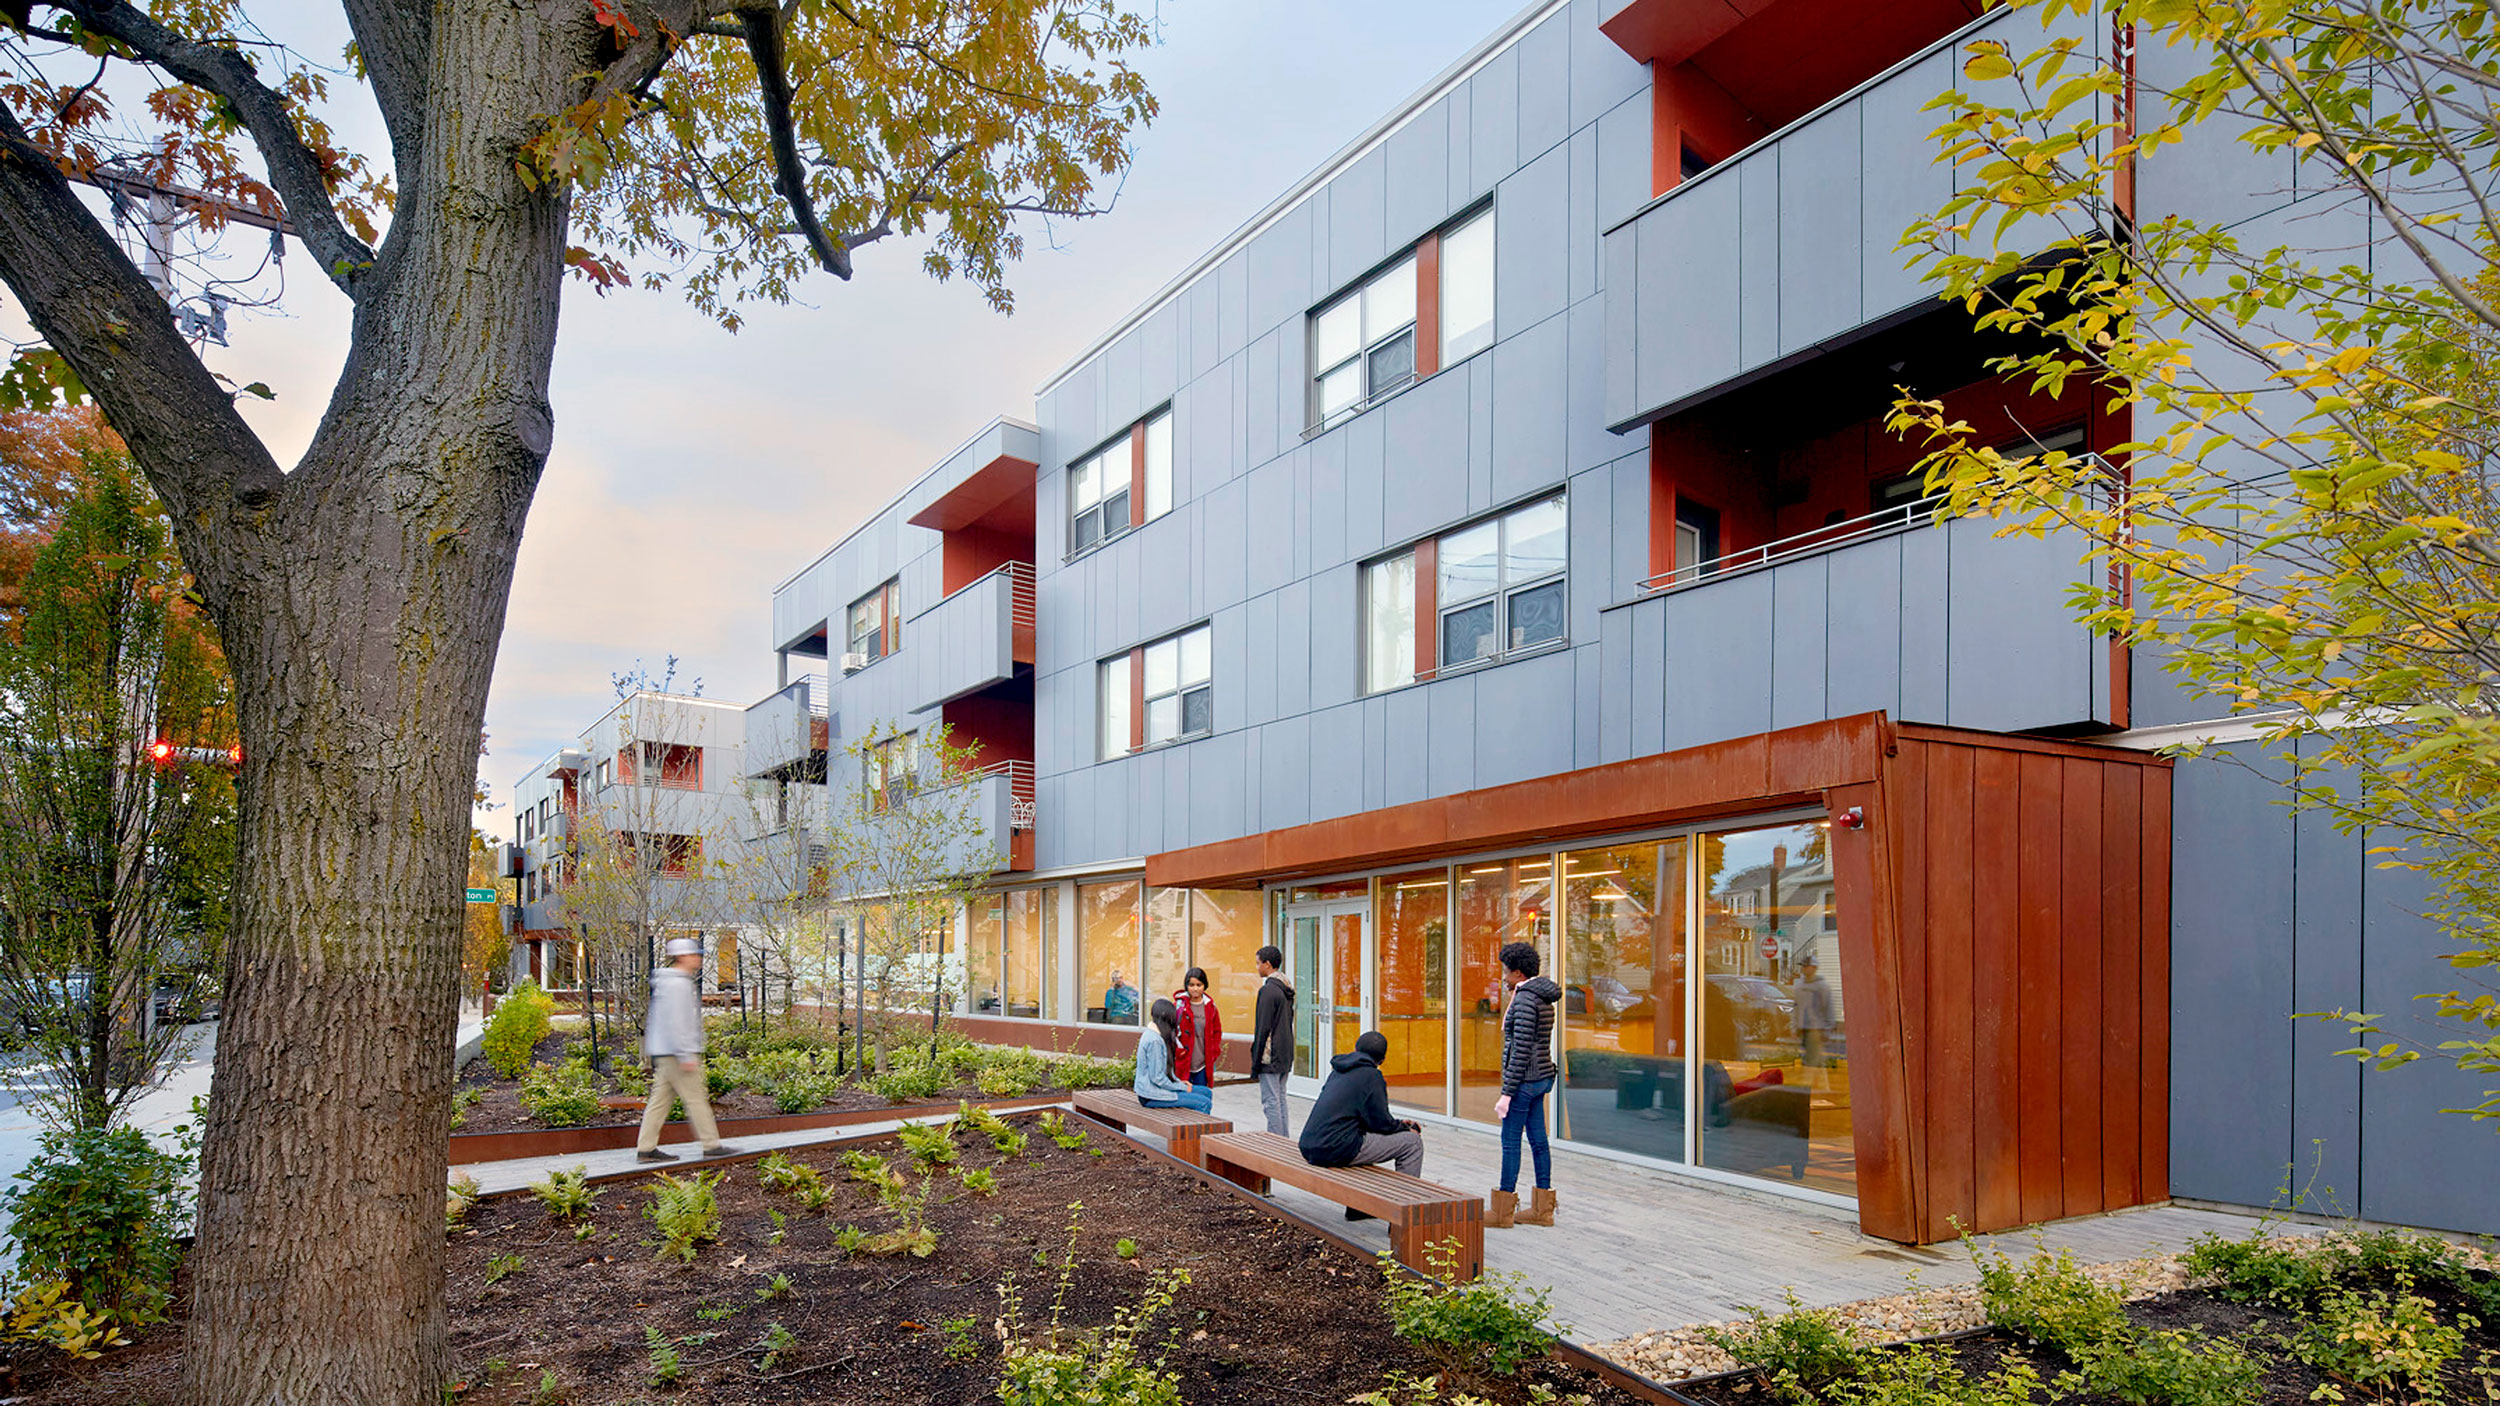 Jefferson Park Apartments by Abacus Architects + Planners. Photo: Bruce T. Martin/David Pollak/Lynne Damianos.